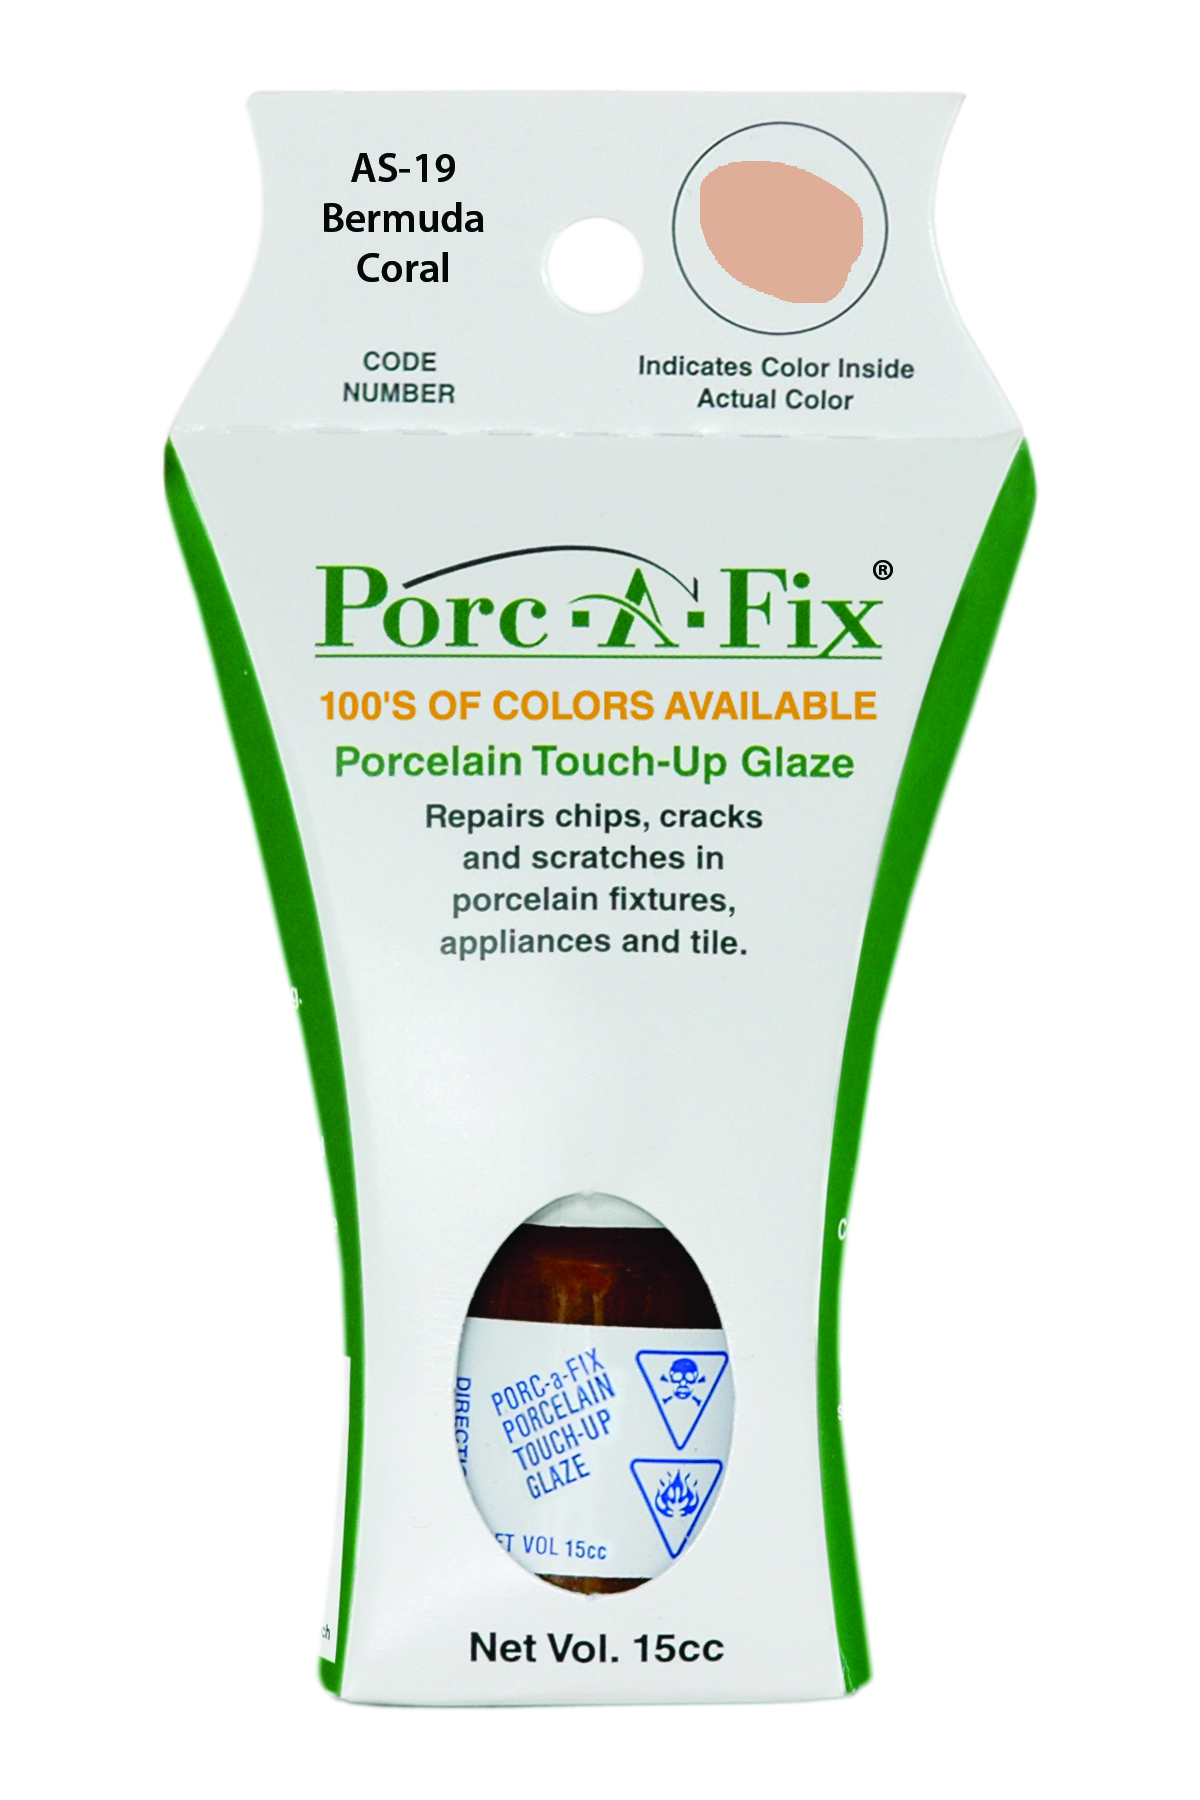 Fixture-Fix | AS-19 | Porc-A-Fix Touch-Up Glaze American Standard Bermuda Coral - Compatible with American Standard 070900-1600A Touch Up Paint Kit - BERMUDA CORAL